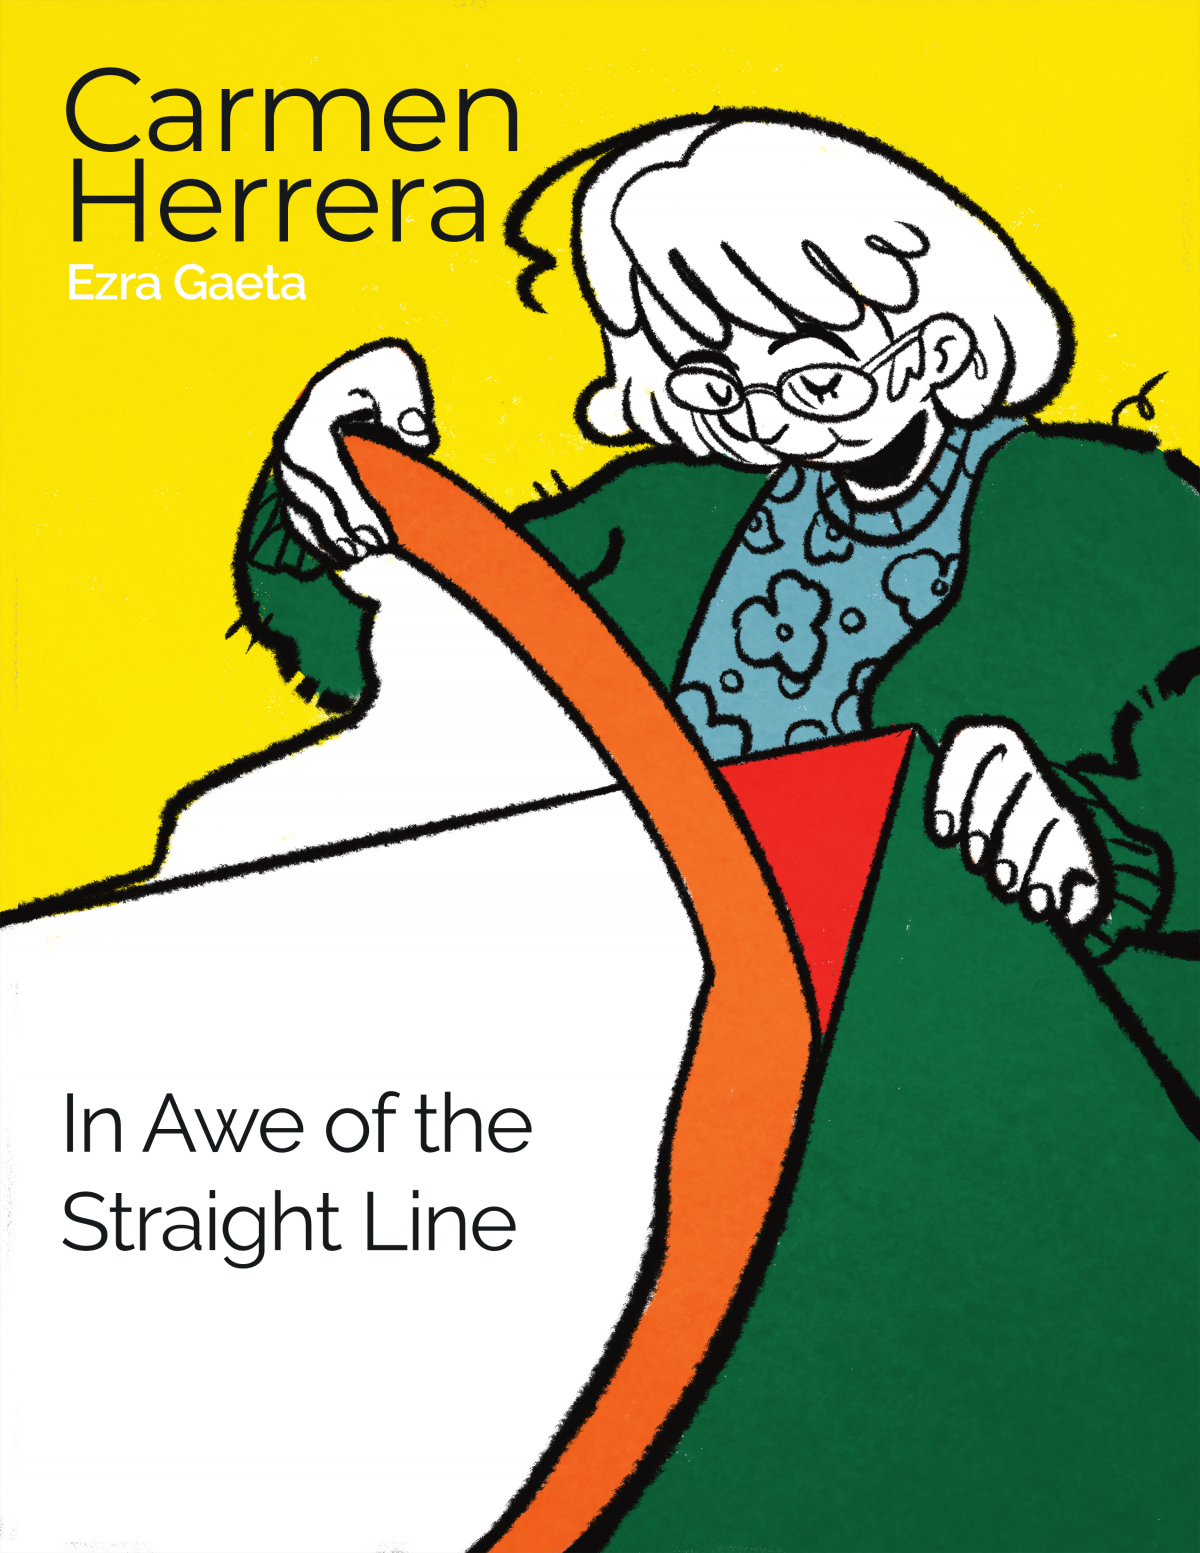 Comic cover with the title "In Awe of a Straight Line" and the name Carmen Herrera. The image is a woman taking tape off the corner of a canvas.